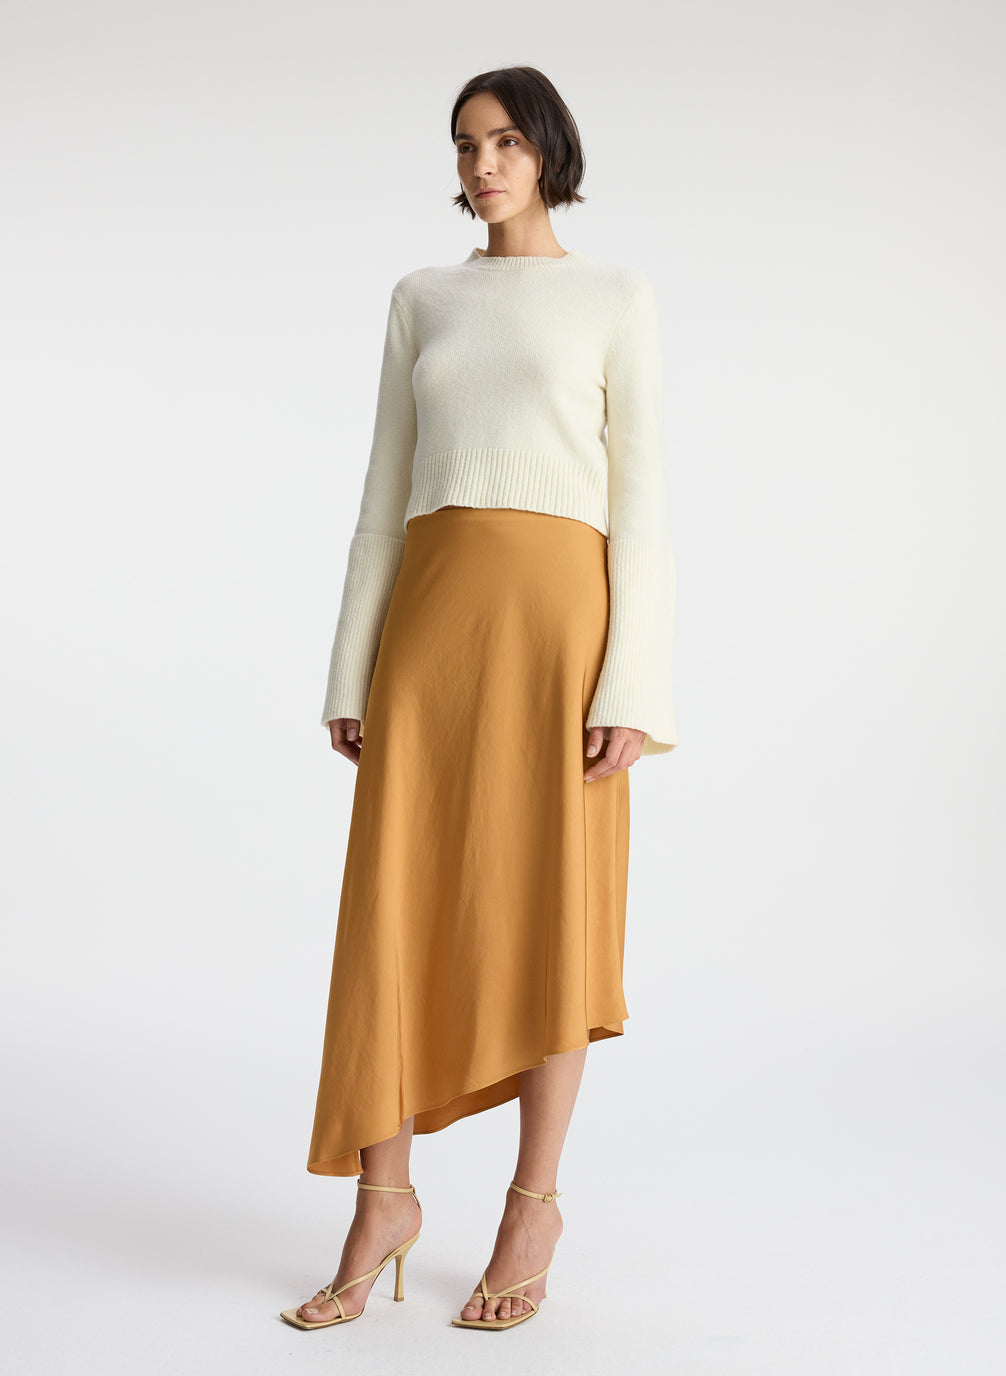 side view of woman wearing white sweater and brown satin asymmetric midi skirt